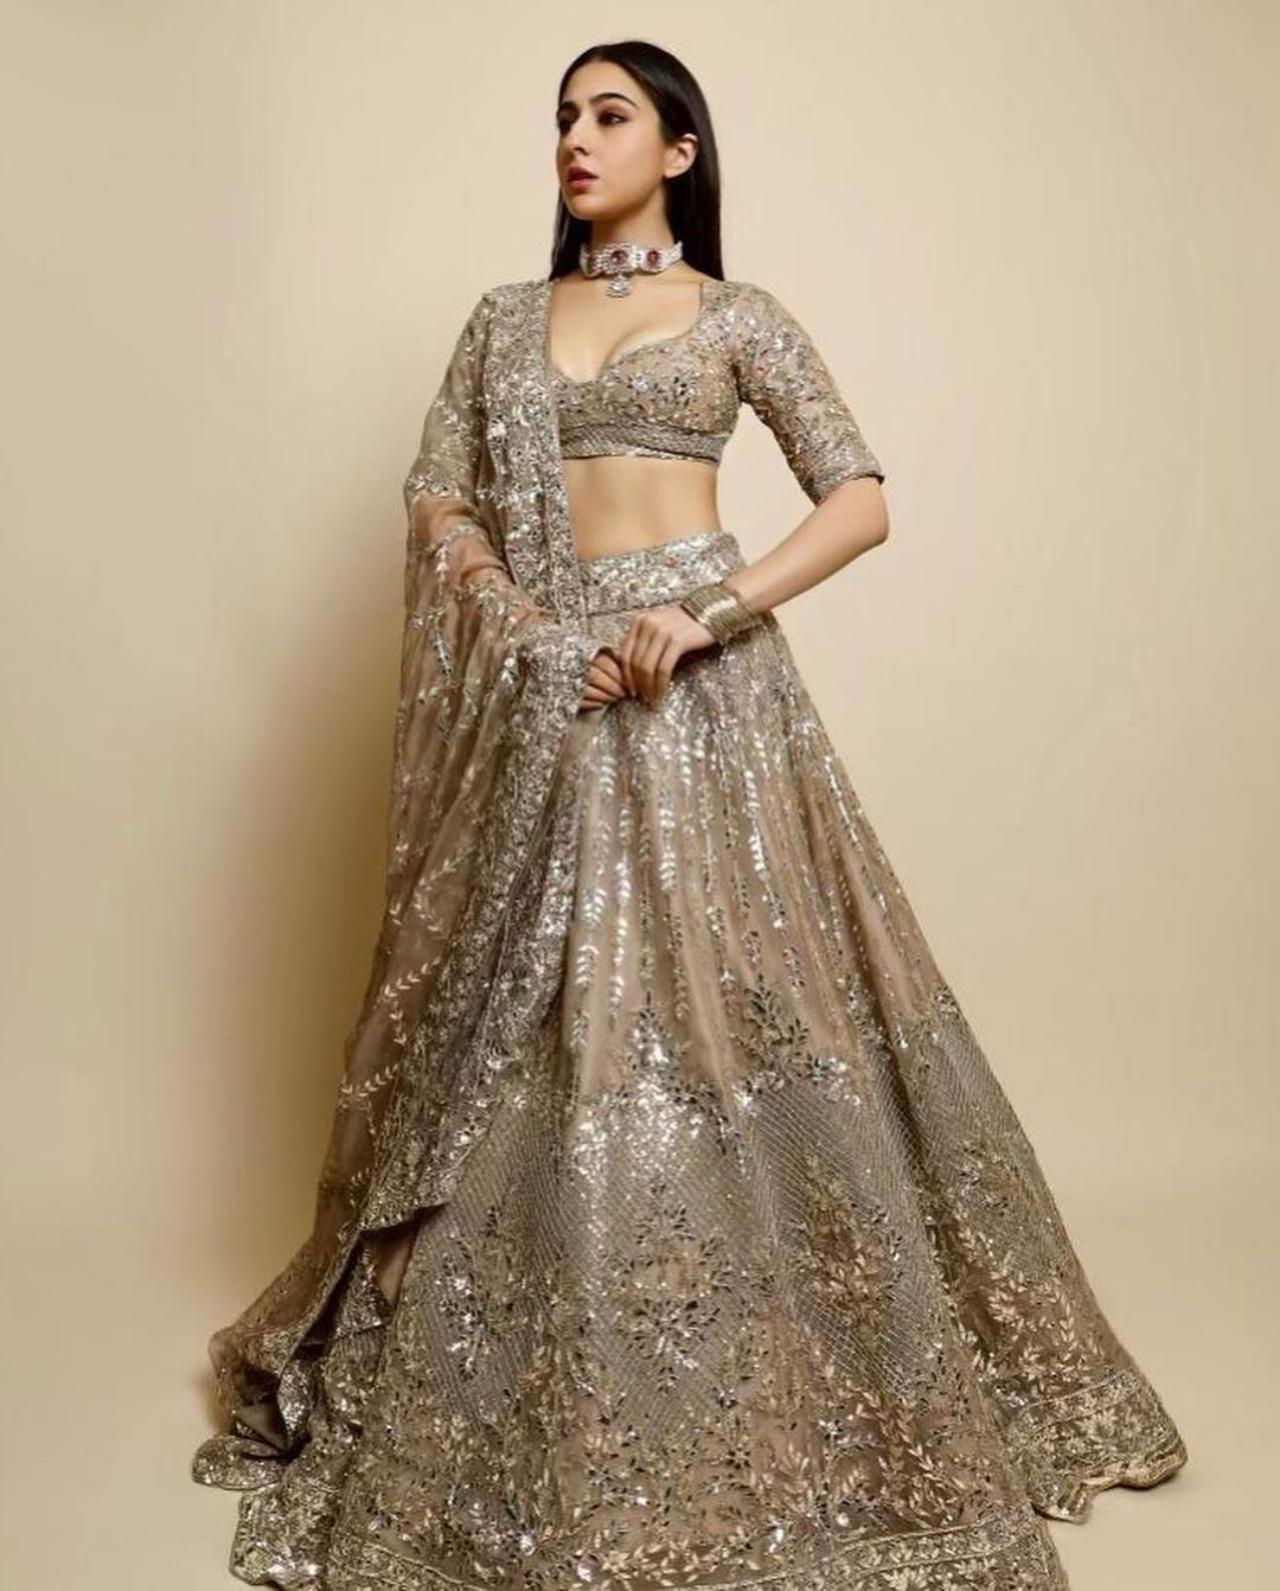 Sara Ali Khan looked every bit royal in this timeless gold look with heavy embroidery work. The fine work on the blouse and lehenga add to the beauty of the ensemble . She completed the look with a choker necklace and metallic bangles